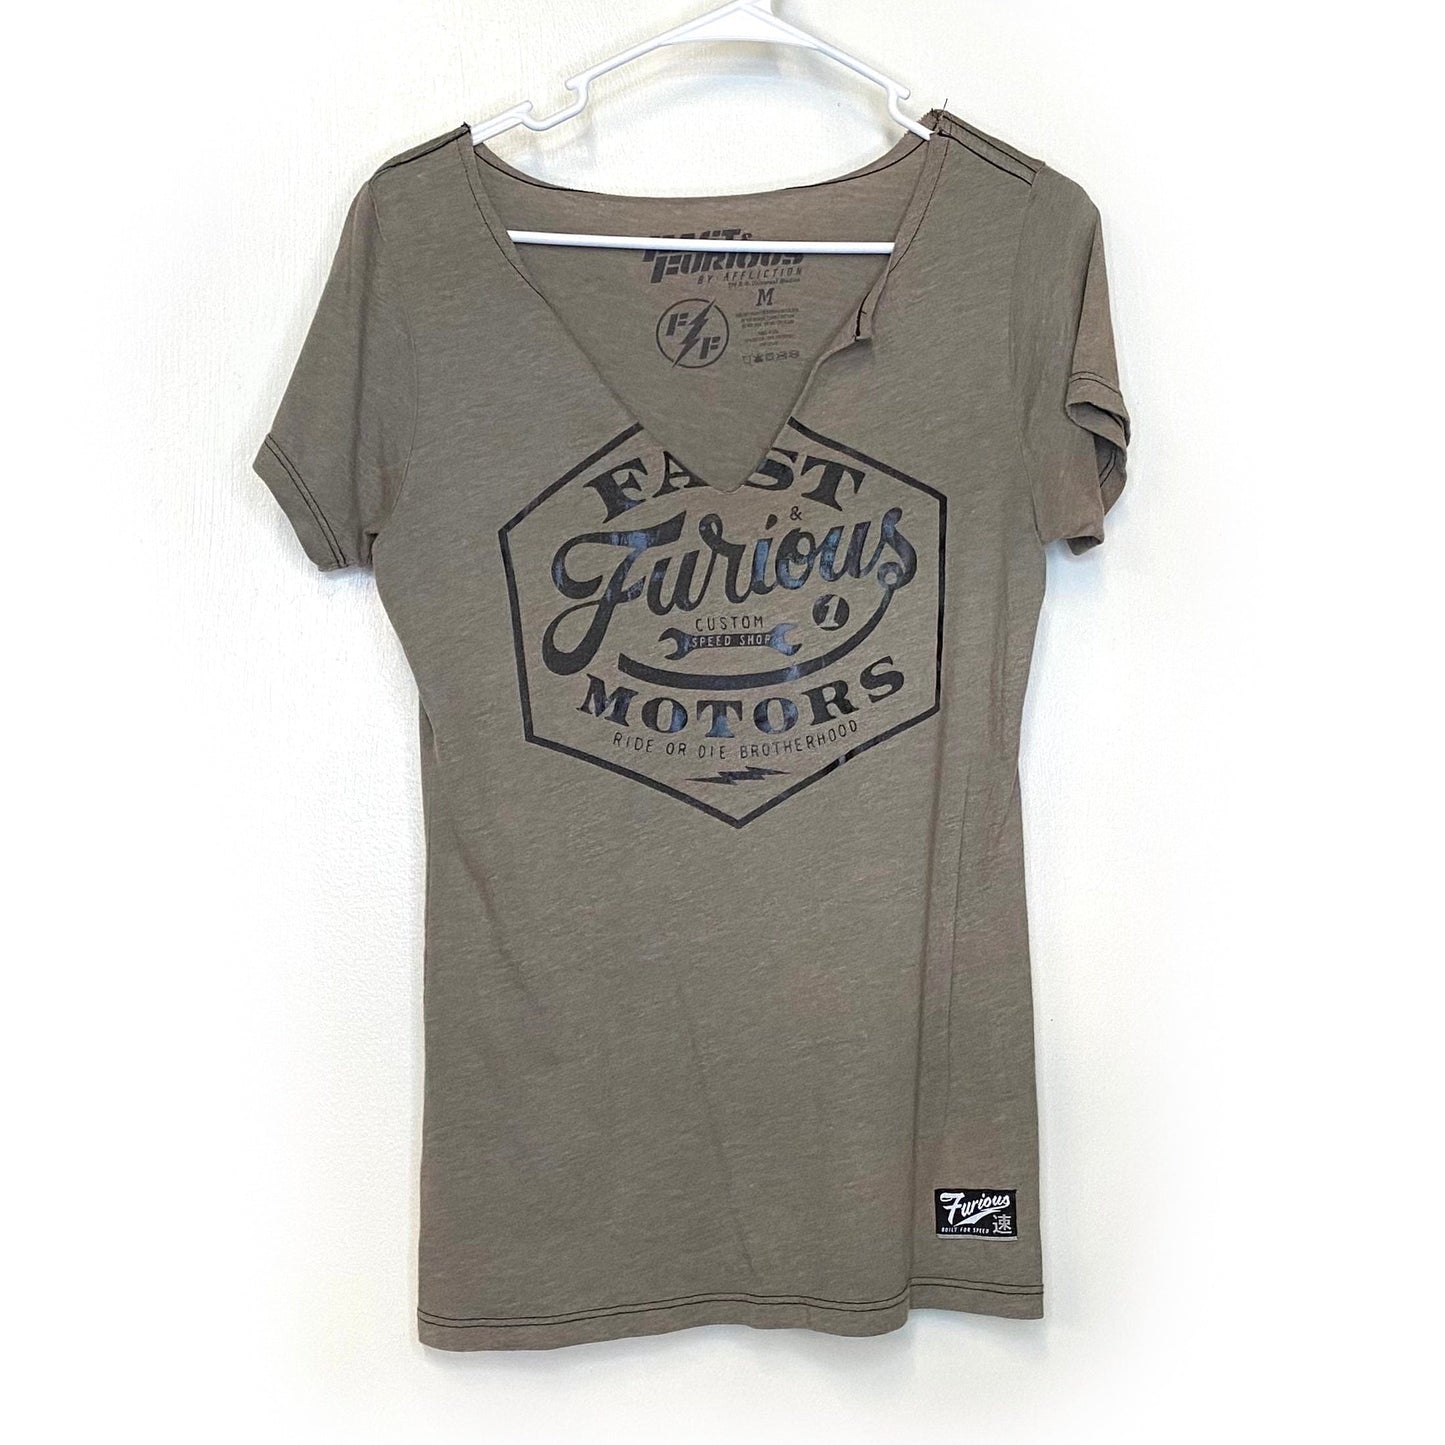 FAST & FURIOUS by Affliction Womens Size M Brownish Gray V-Neck T-Shirt S/s Pre-Owned